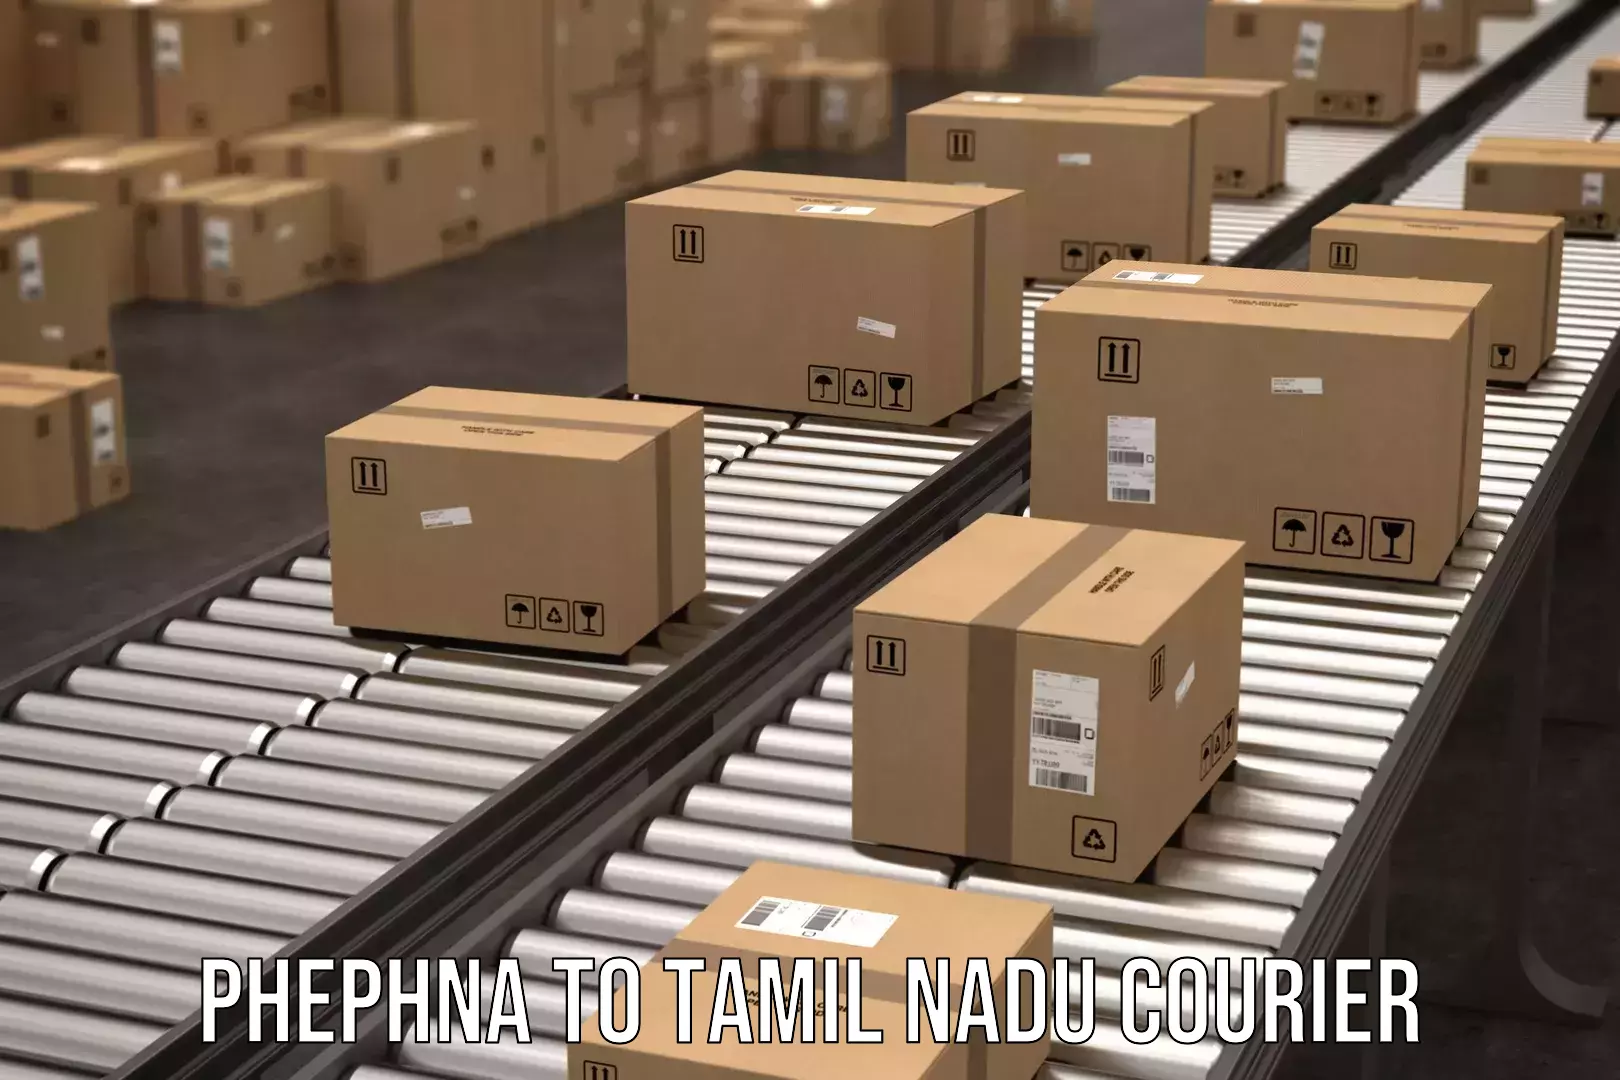 Round-the-clock parcel delivery Phephna to Tamil Nadu